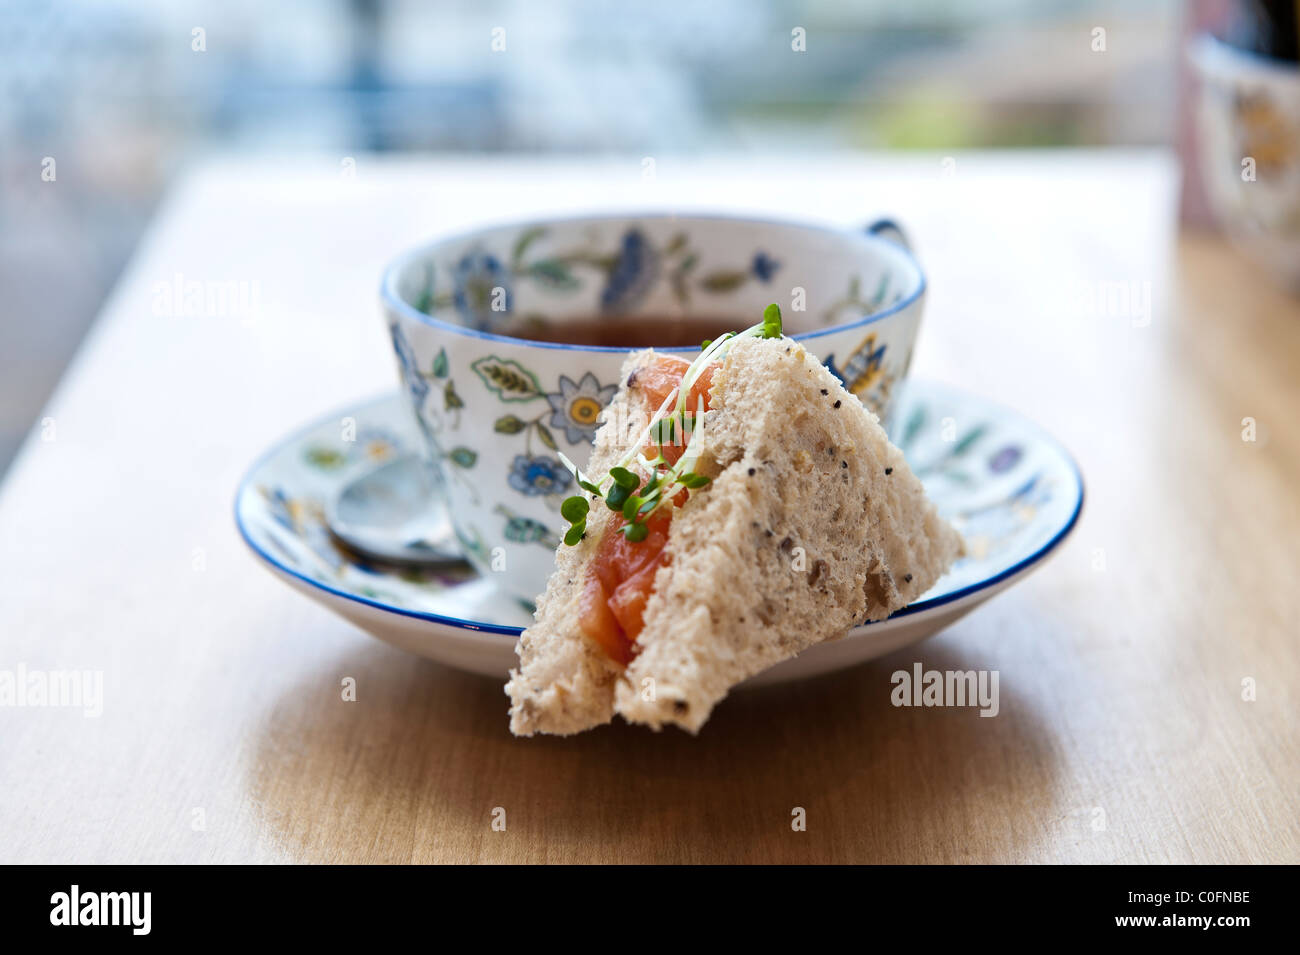 English cup of afternoon tea with smoked salmon sandwich Stock Photo